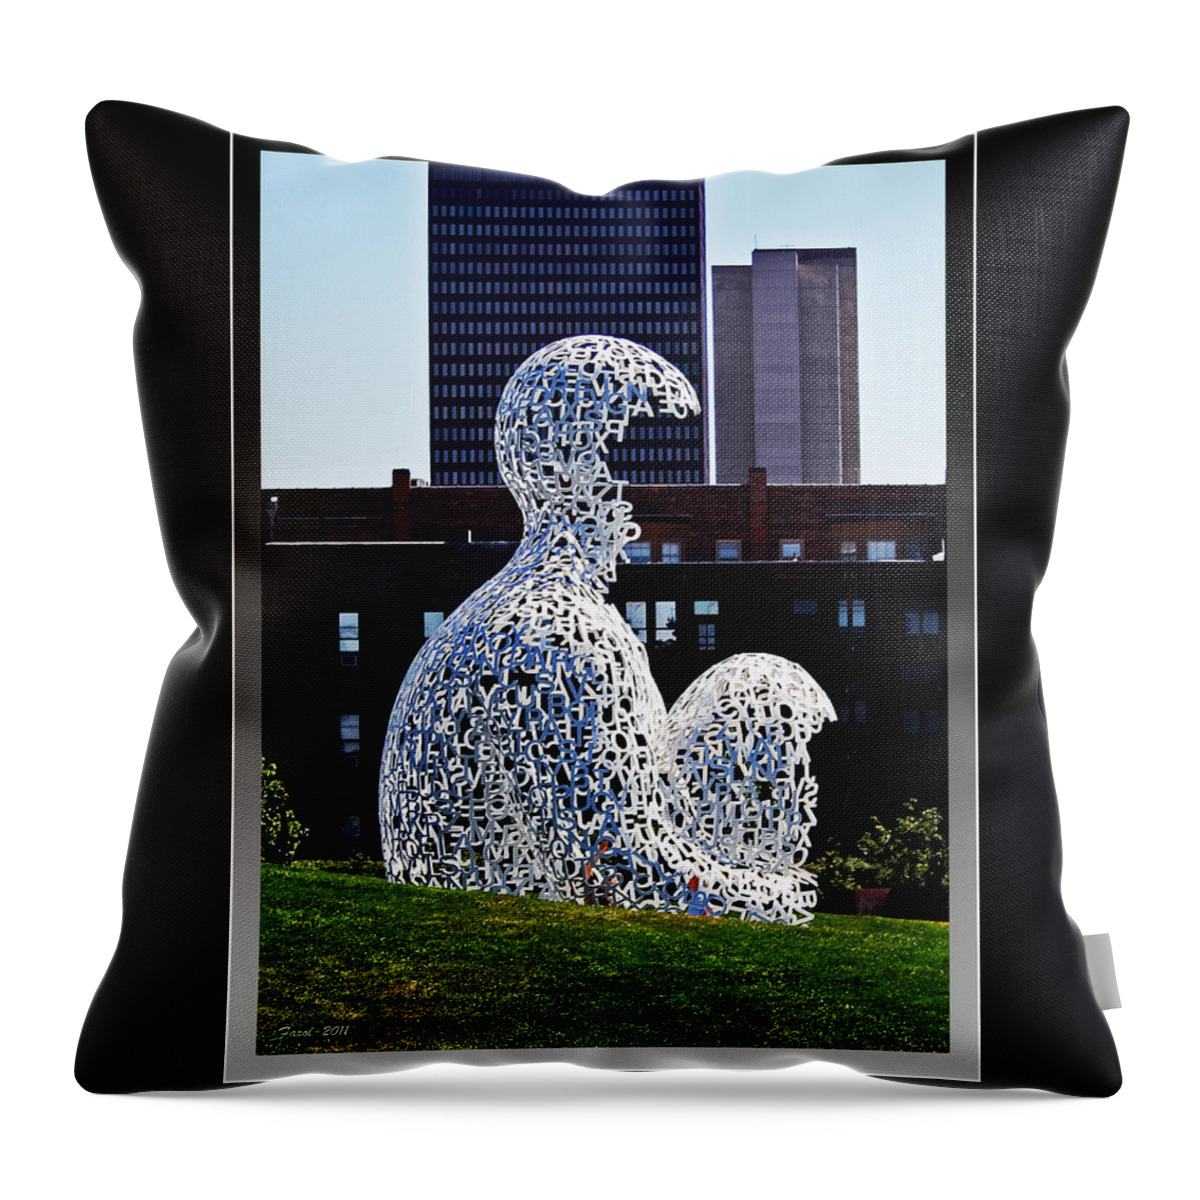 Nomade Throw Pillow featuring the photograph Nomade in Des Moines by Farol Tomson